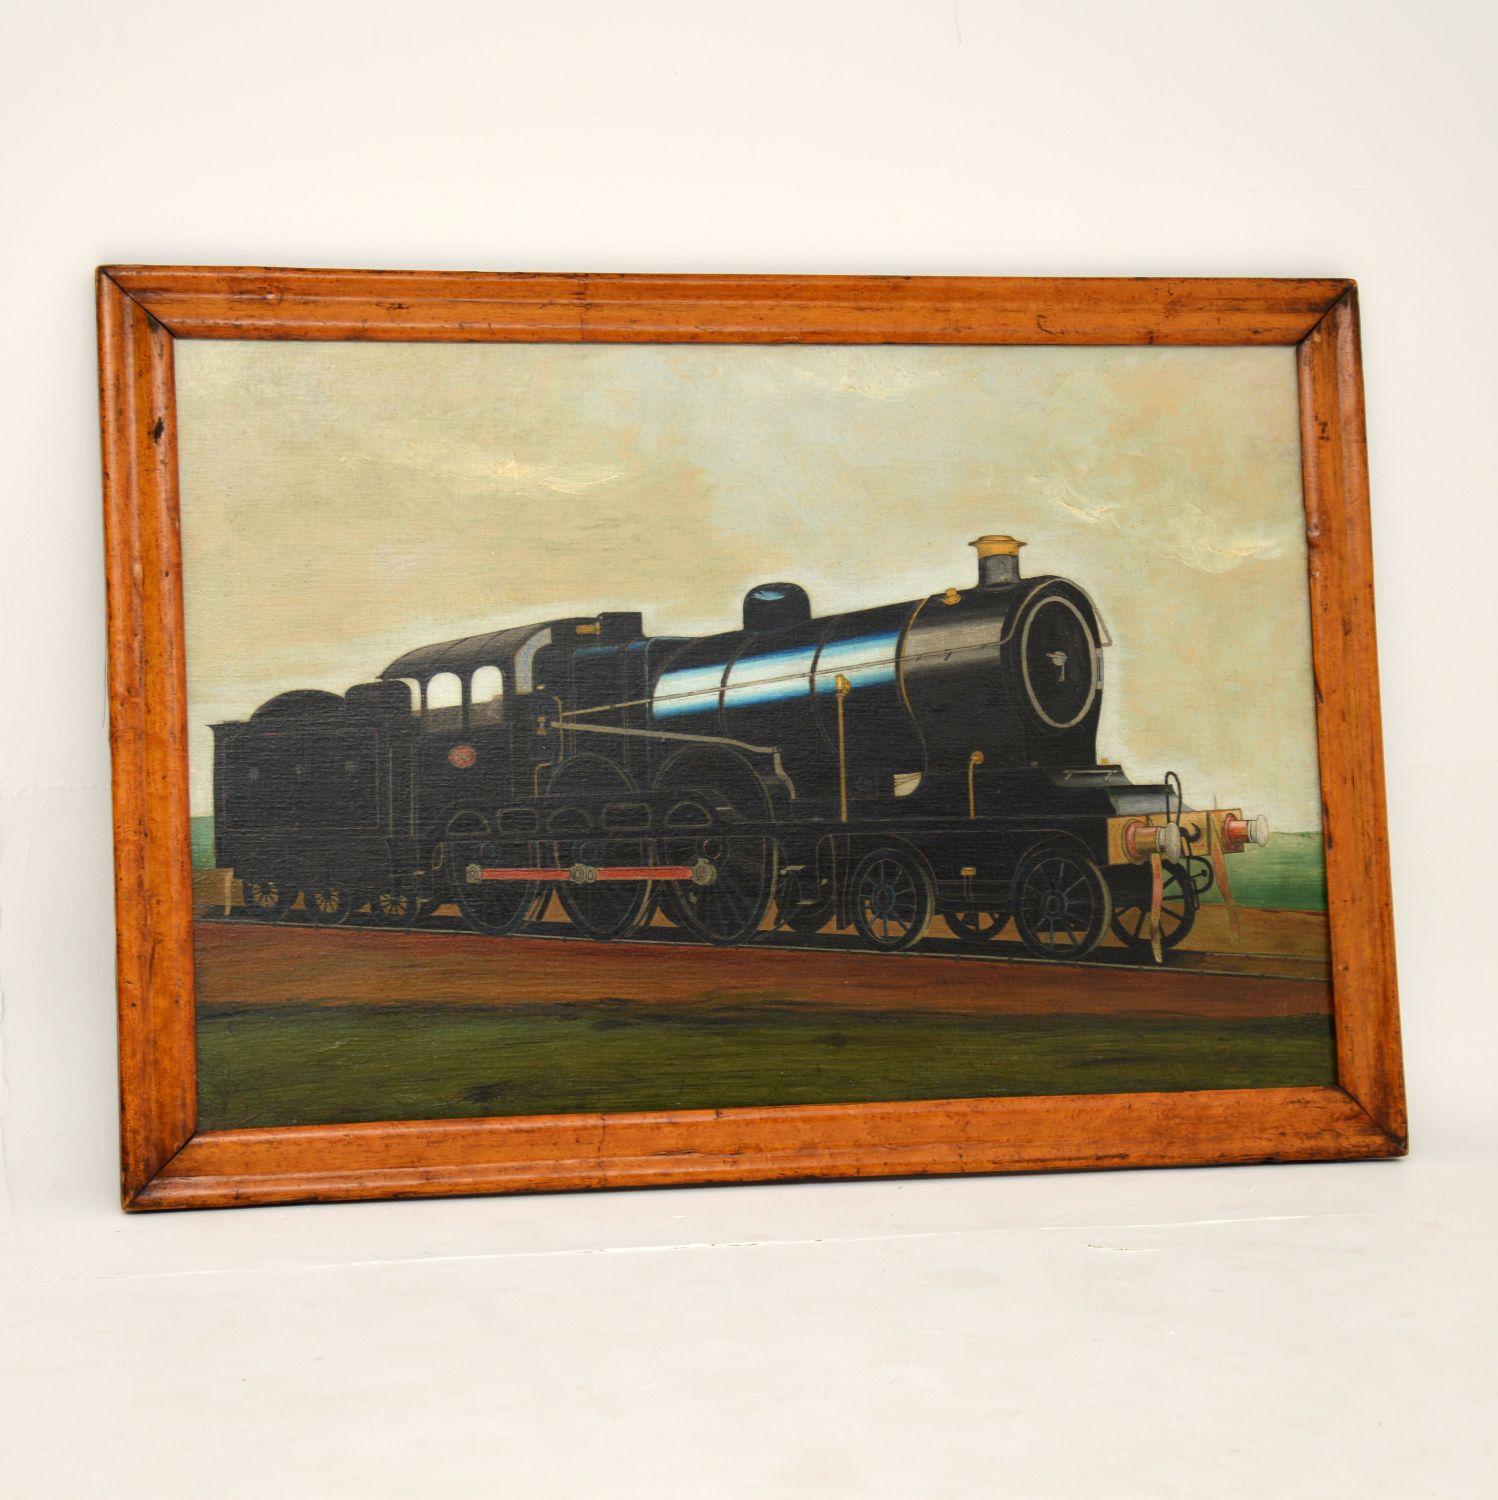 A fine antique Victorian oil painting of a steam engine train which I would date from around the 1880’s period.

This is a lovely subject and is a beautifully executed painting. The colour tones and details are particularly striking, this would make